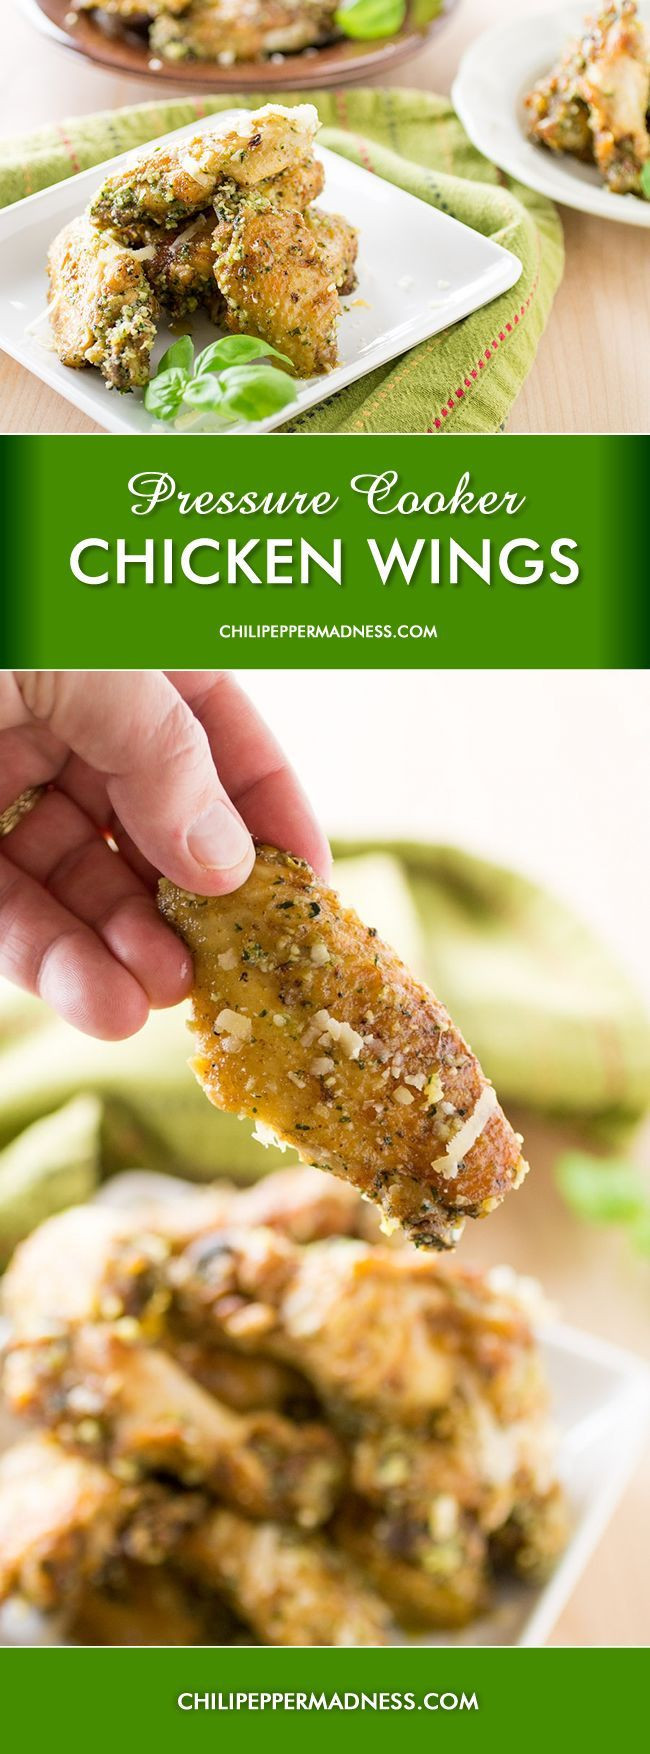 Pressure Cooker Chicken Wings
 25 best images about Instant Pot on Pinterest